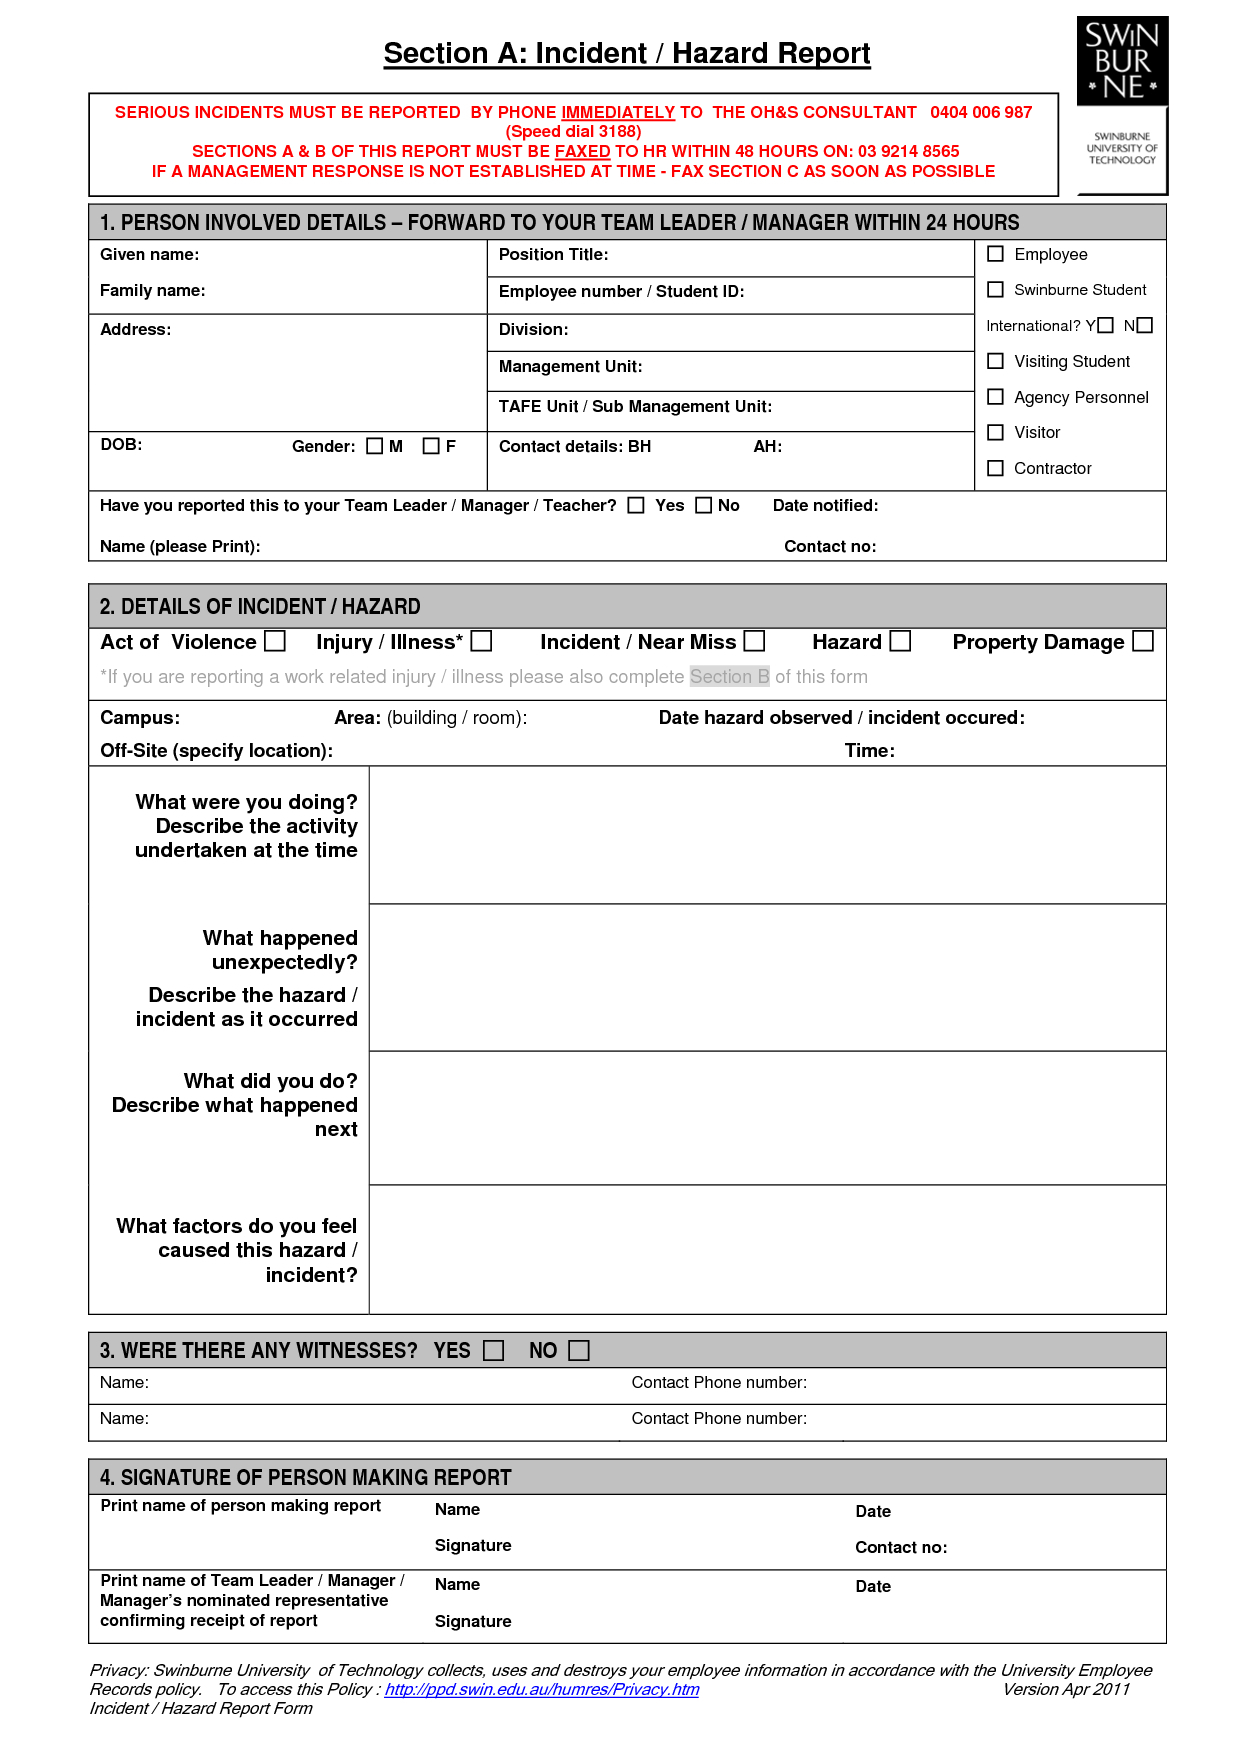 Hazard Incident Report Form Template - Business Template Ideas With Regard To Hazard Incident Report Form Template